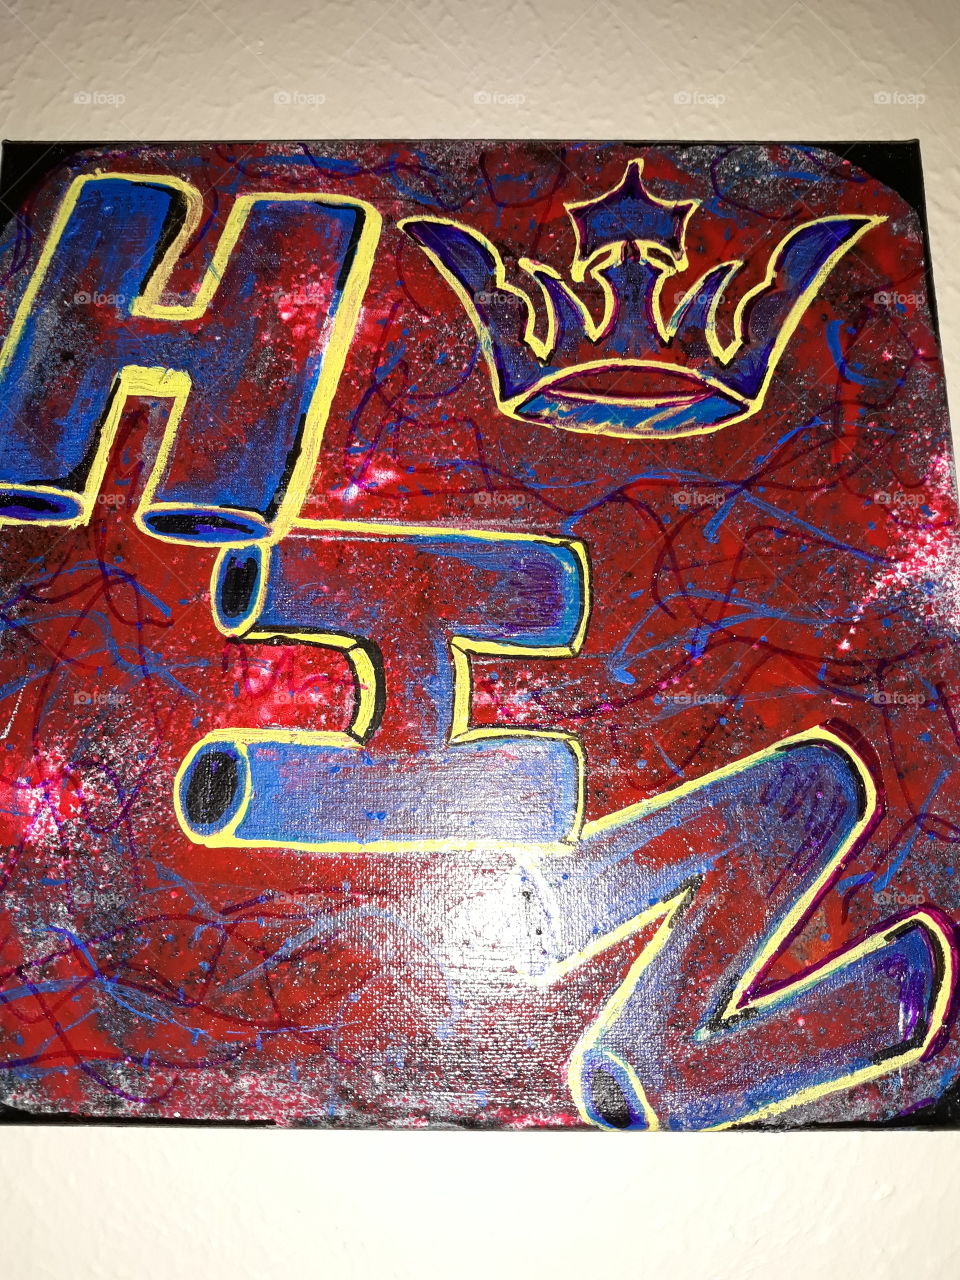 Red and Blue Pop Color "Hiz"